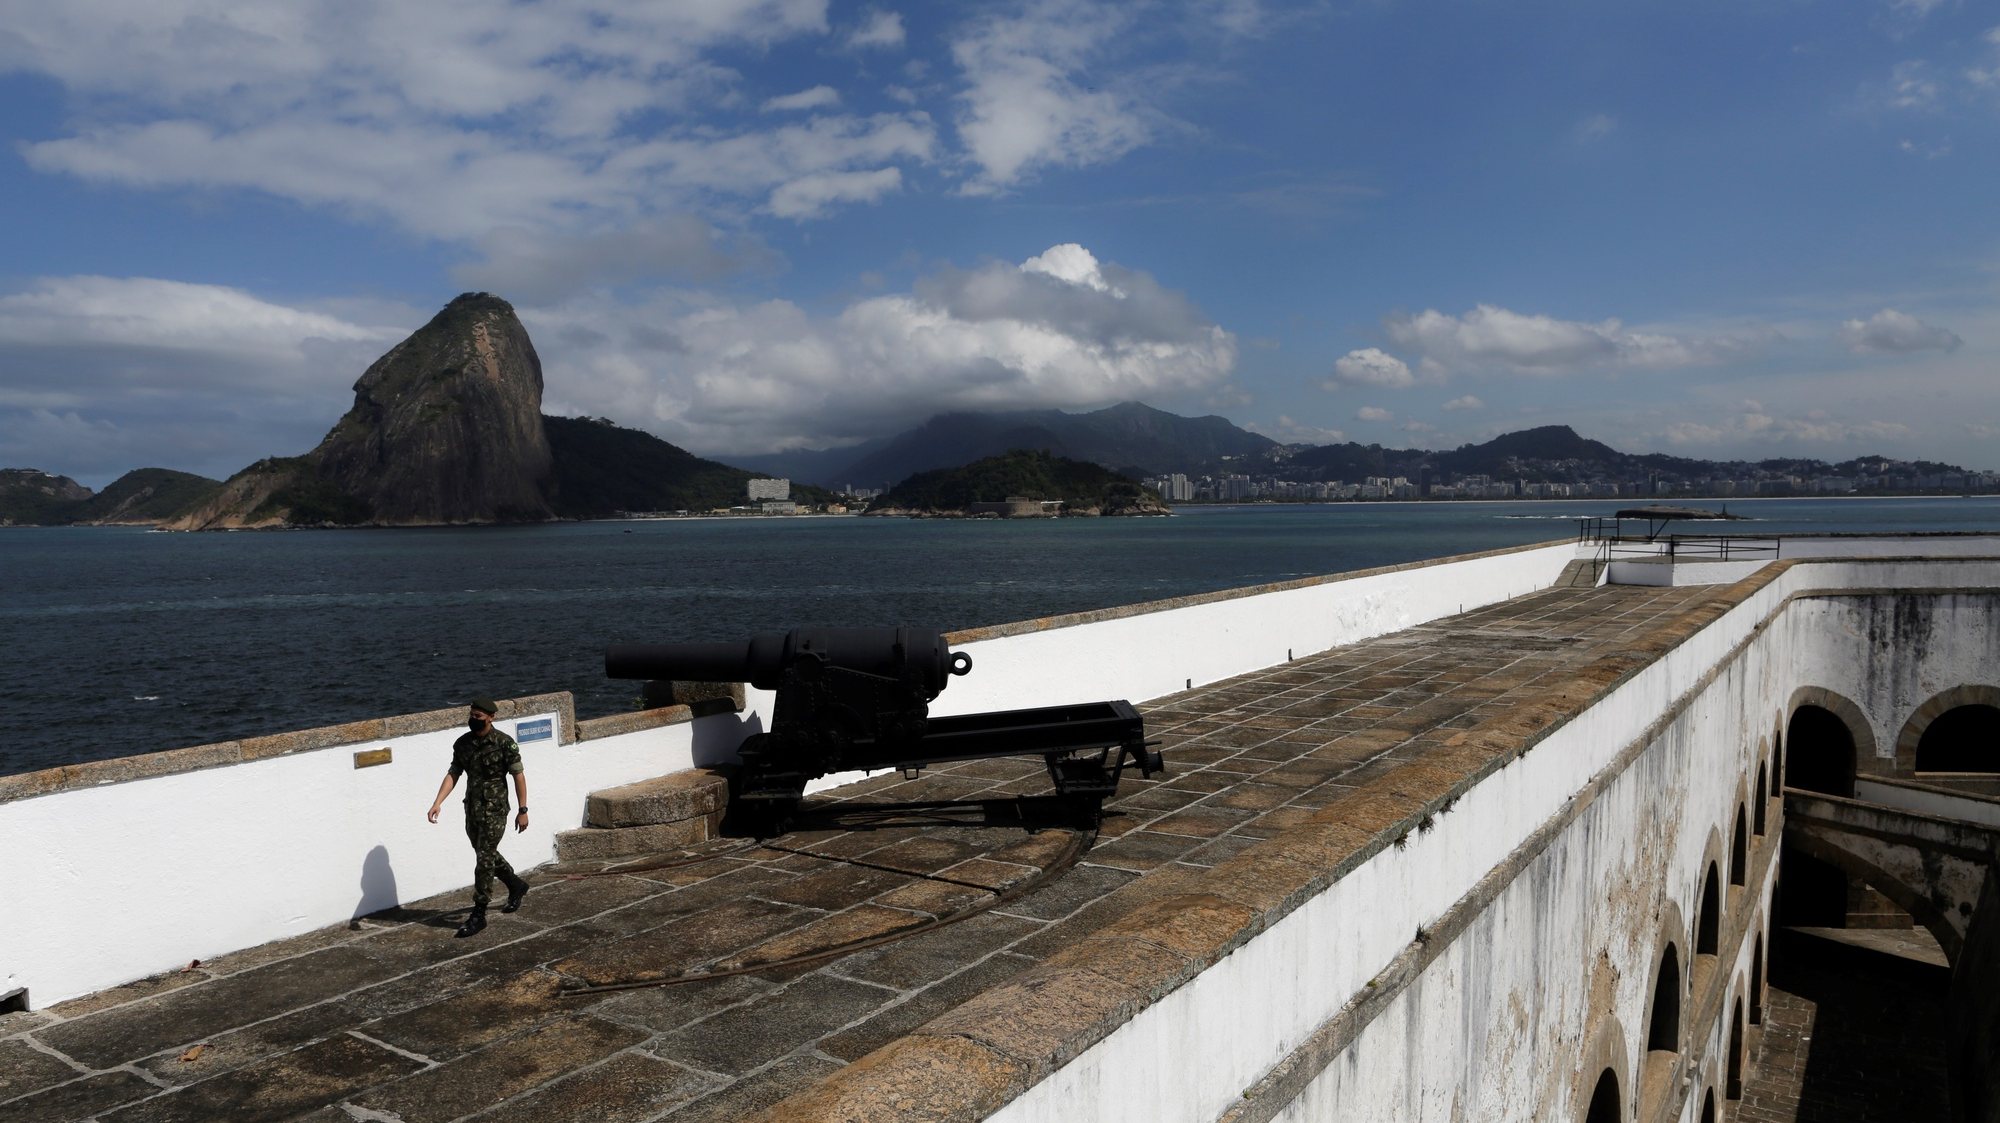 epa09404428 A man visits the Santa Cruz da Barra fort, with Rio de Janeiro seen in the background, in Niteroi, Brazil, 07 August 2021. Rio de Janeiro currently has three items on the UNESCO World Heritage List; now, the city promotes the inclusion of two fortresses, Santa Cruz da Barra and Sao Joao, built during colonial times.  EPA/Antonio Lacerda